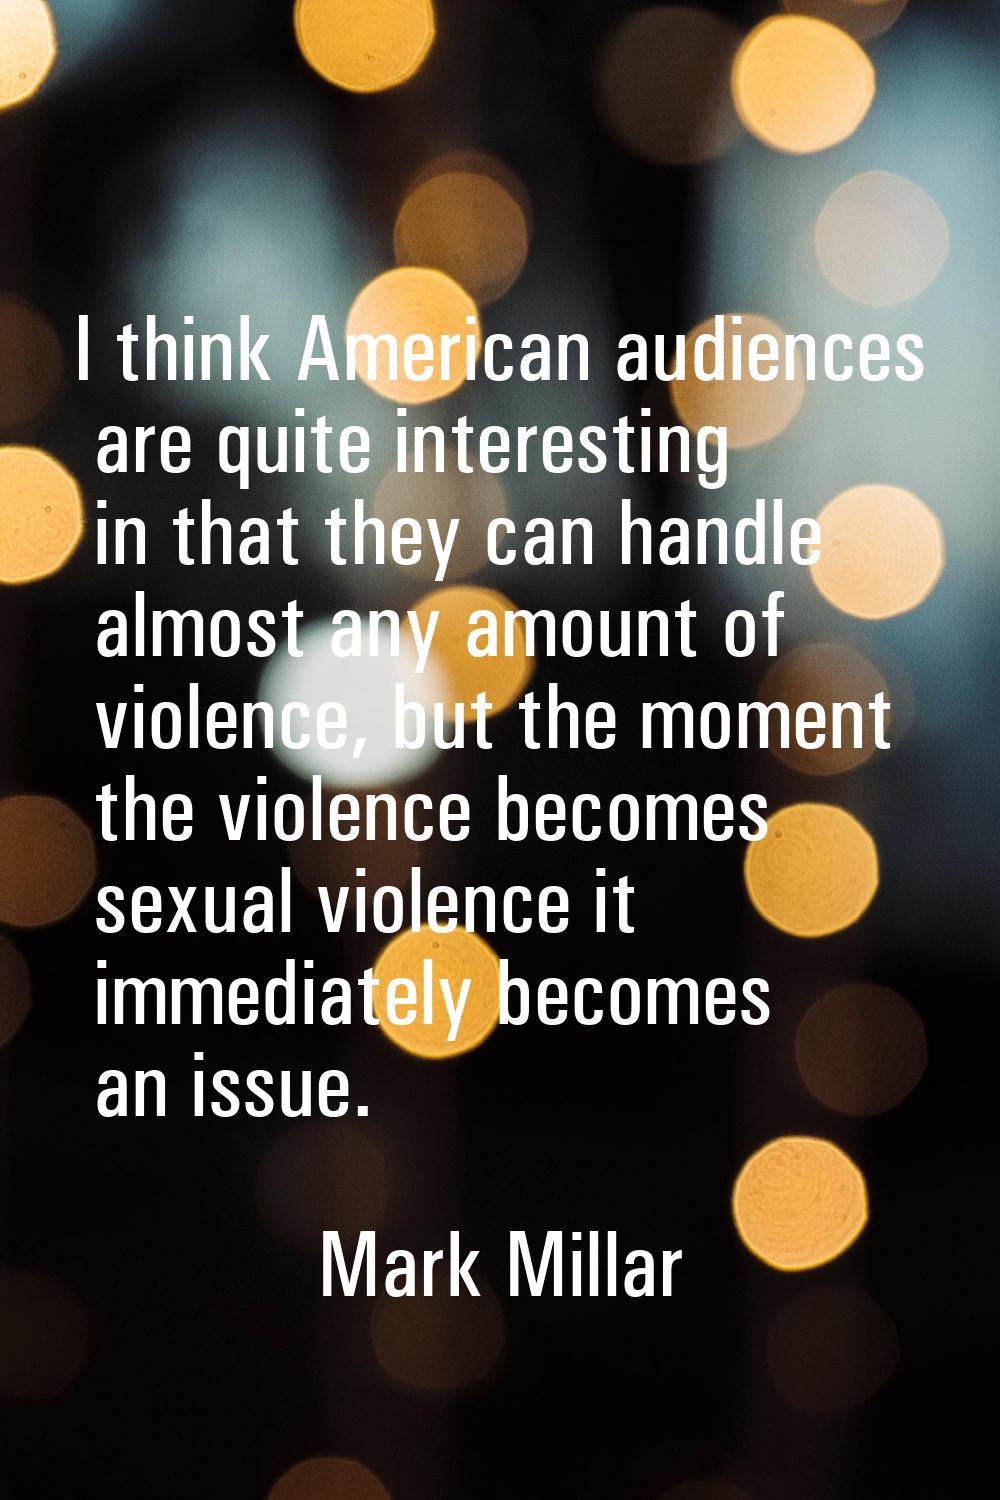 I think American audiences are quite interesting in that they can handle almost any amount of viole